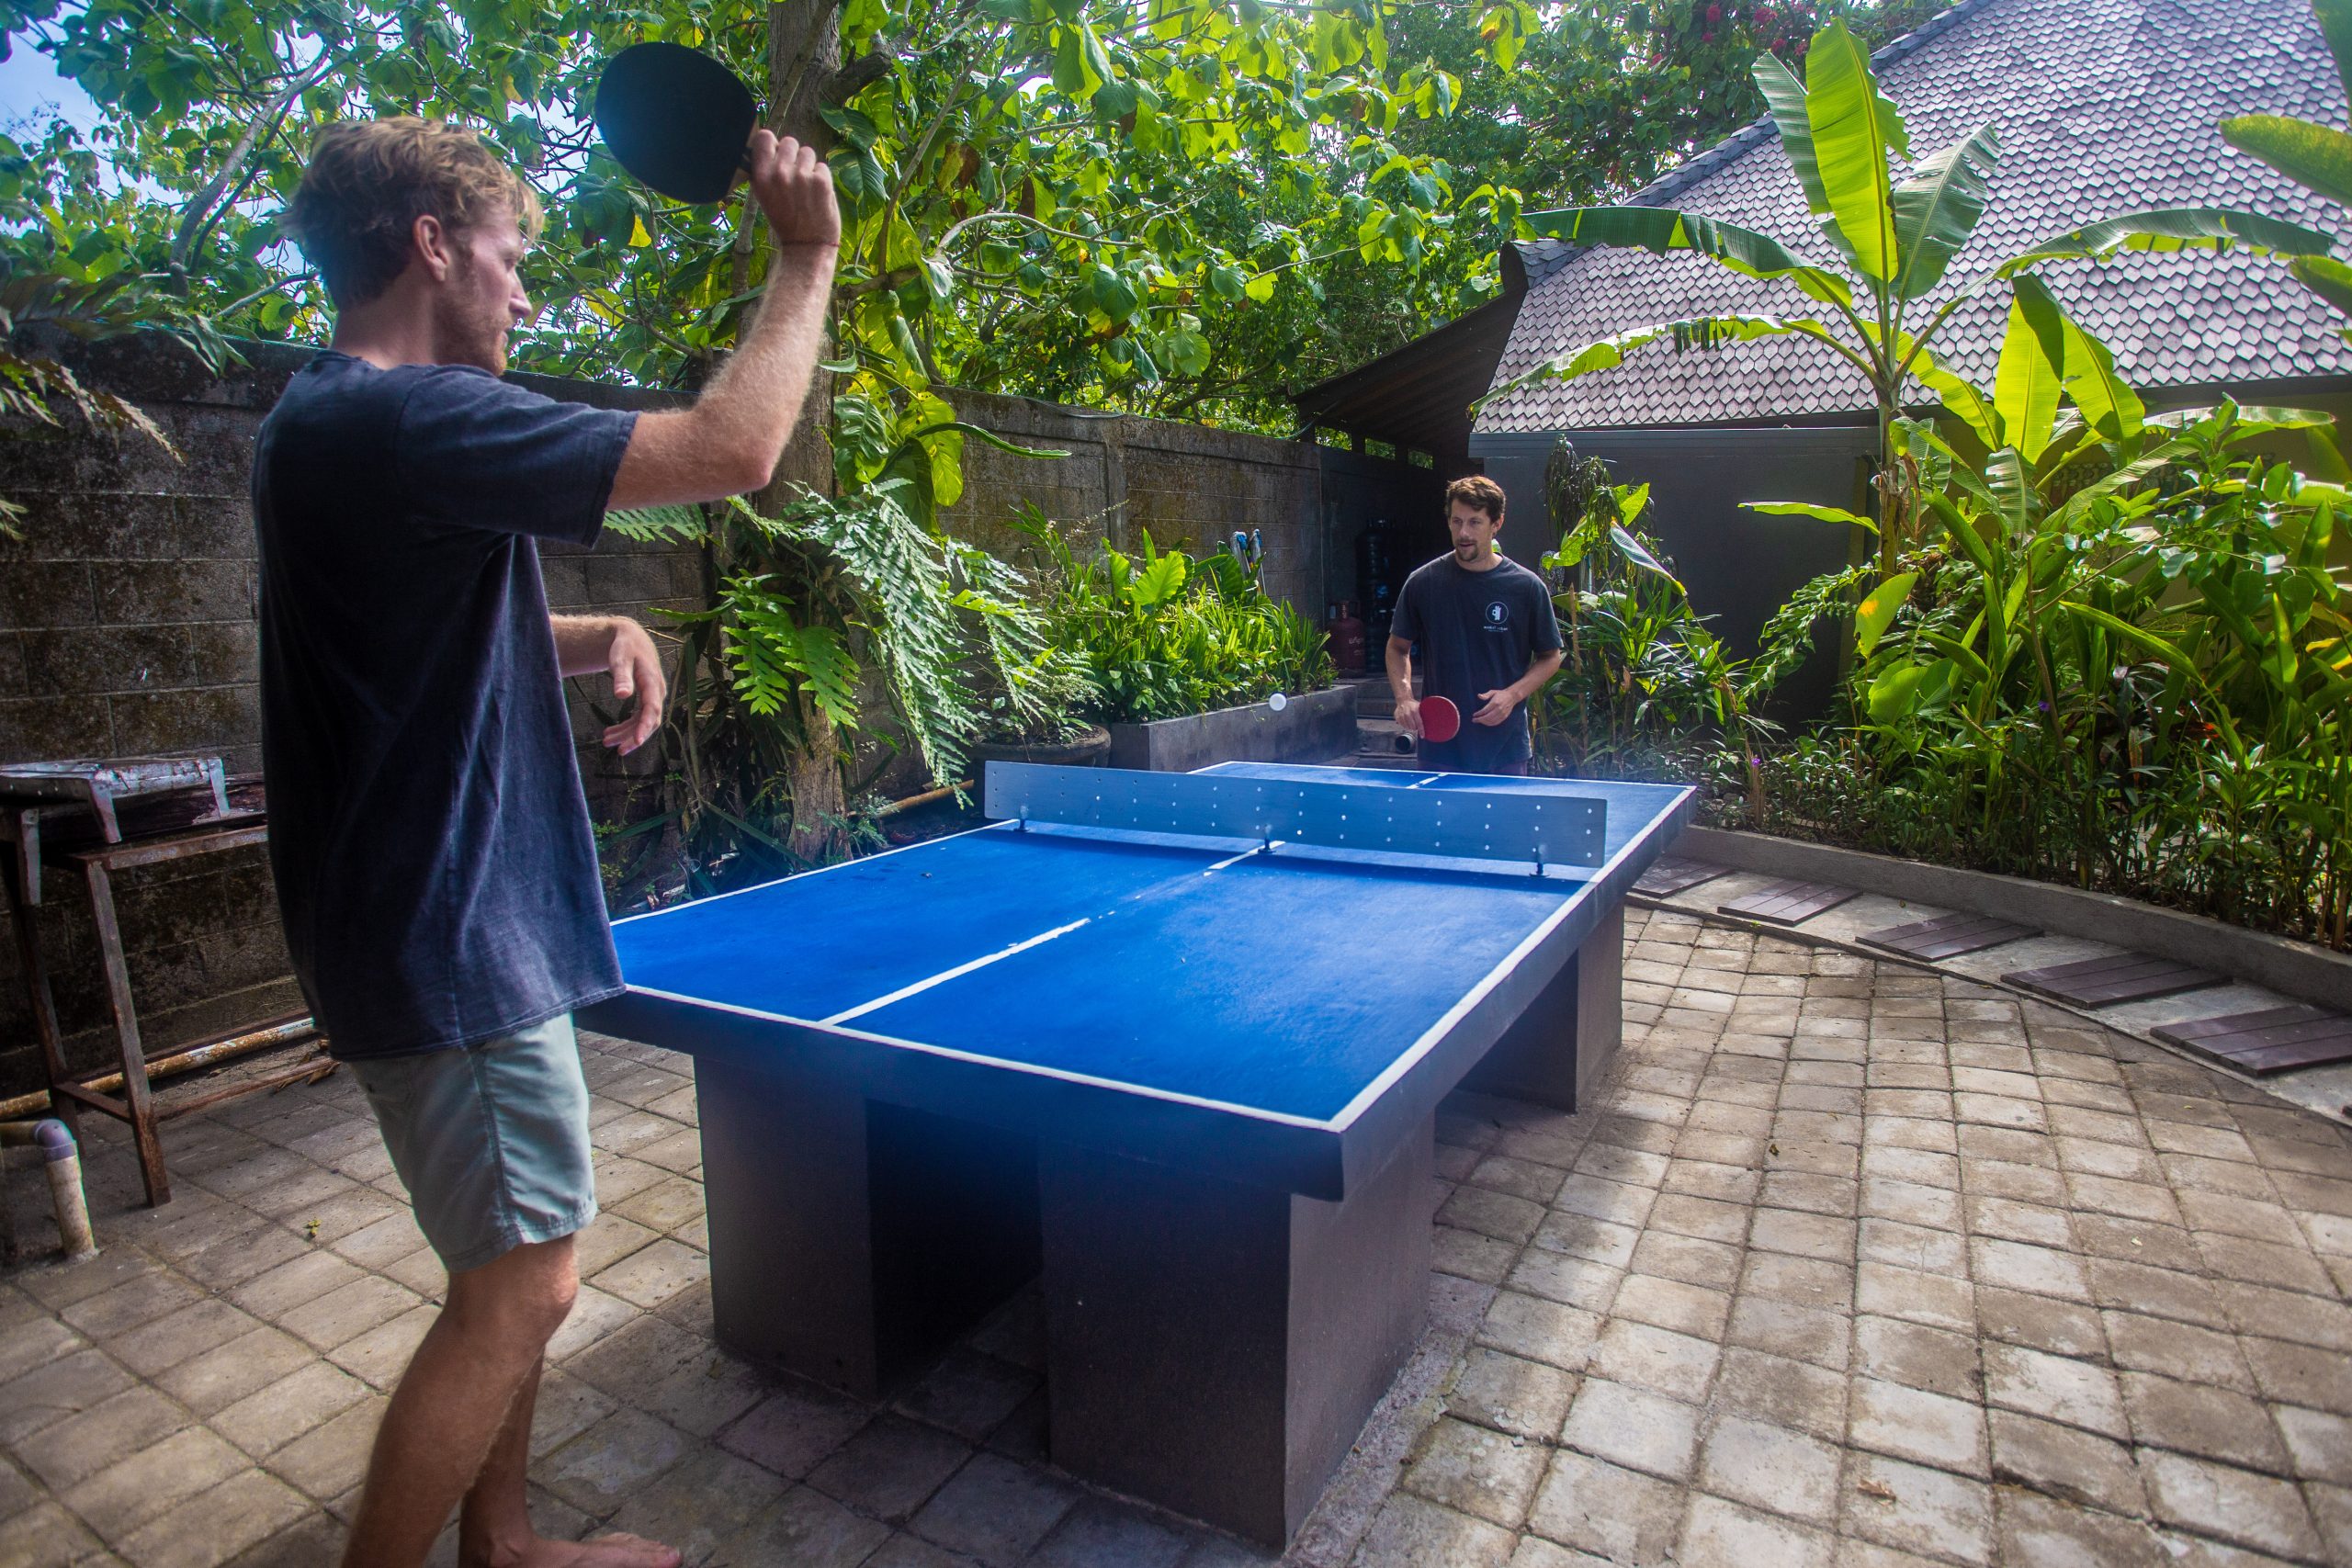 Two people playing ping pong.